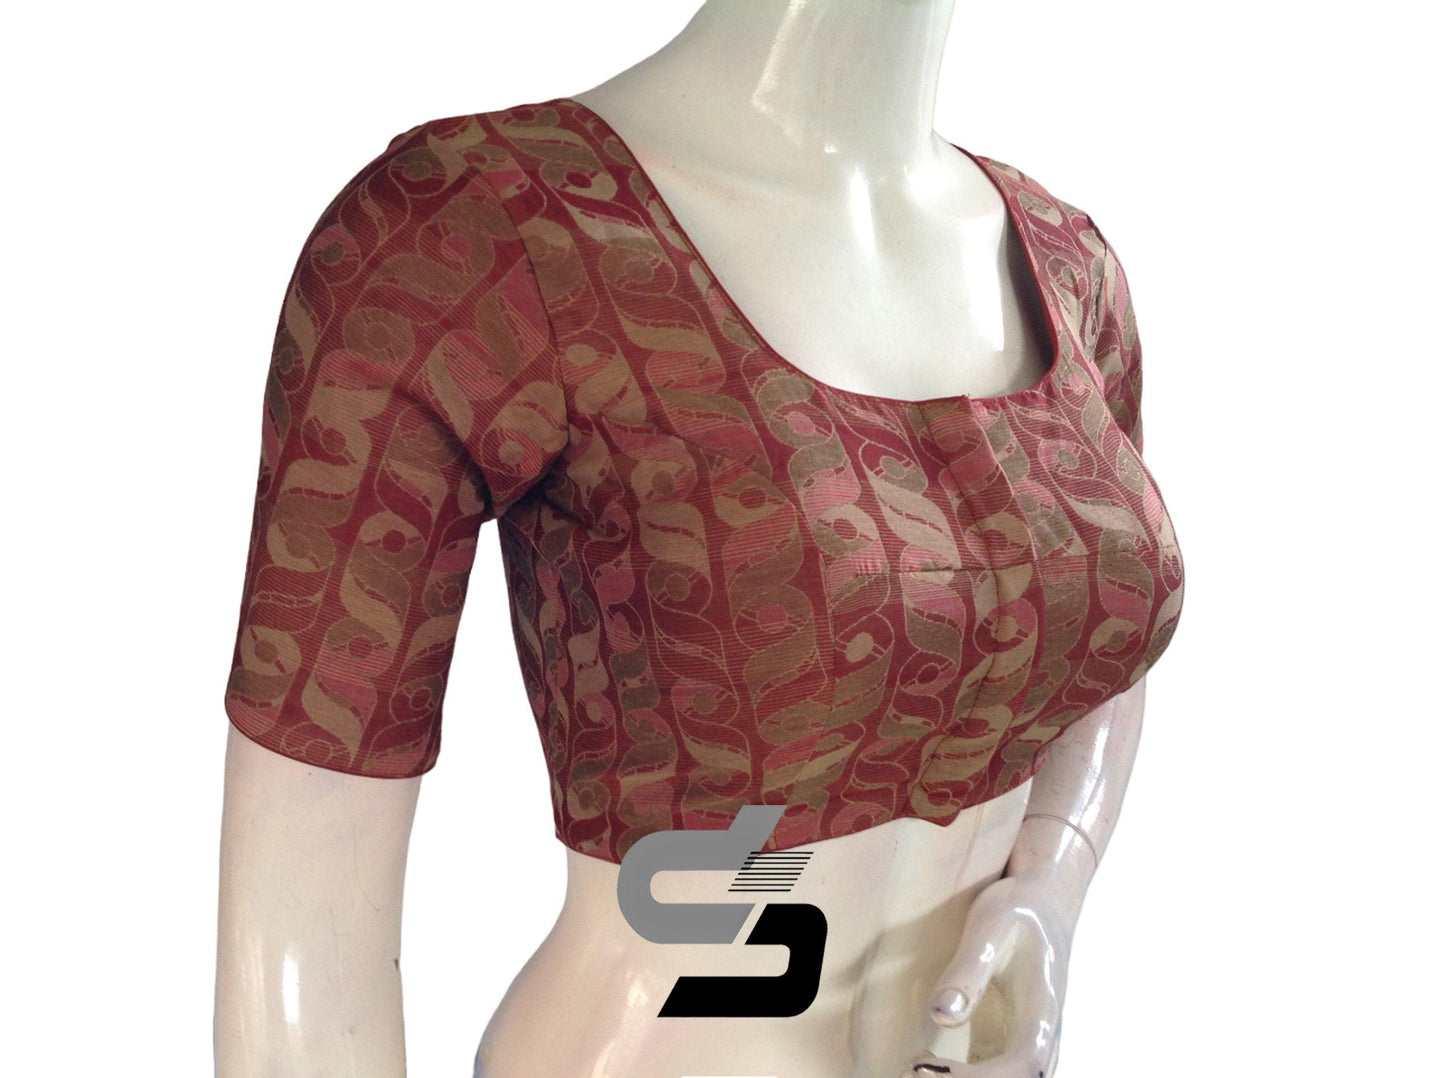 Maroon Color Multi silk Readymade Blouse, Indian Saree Blouse